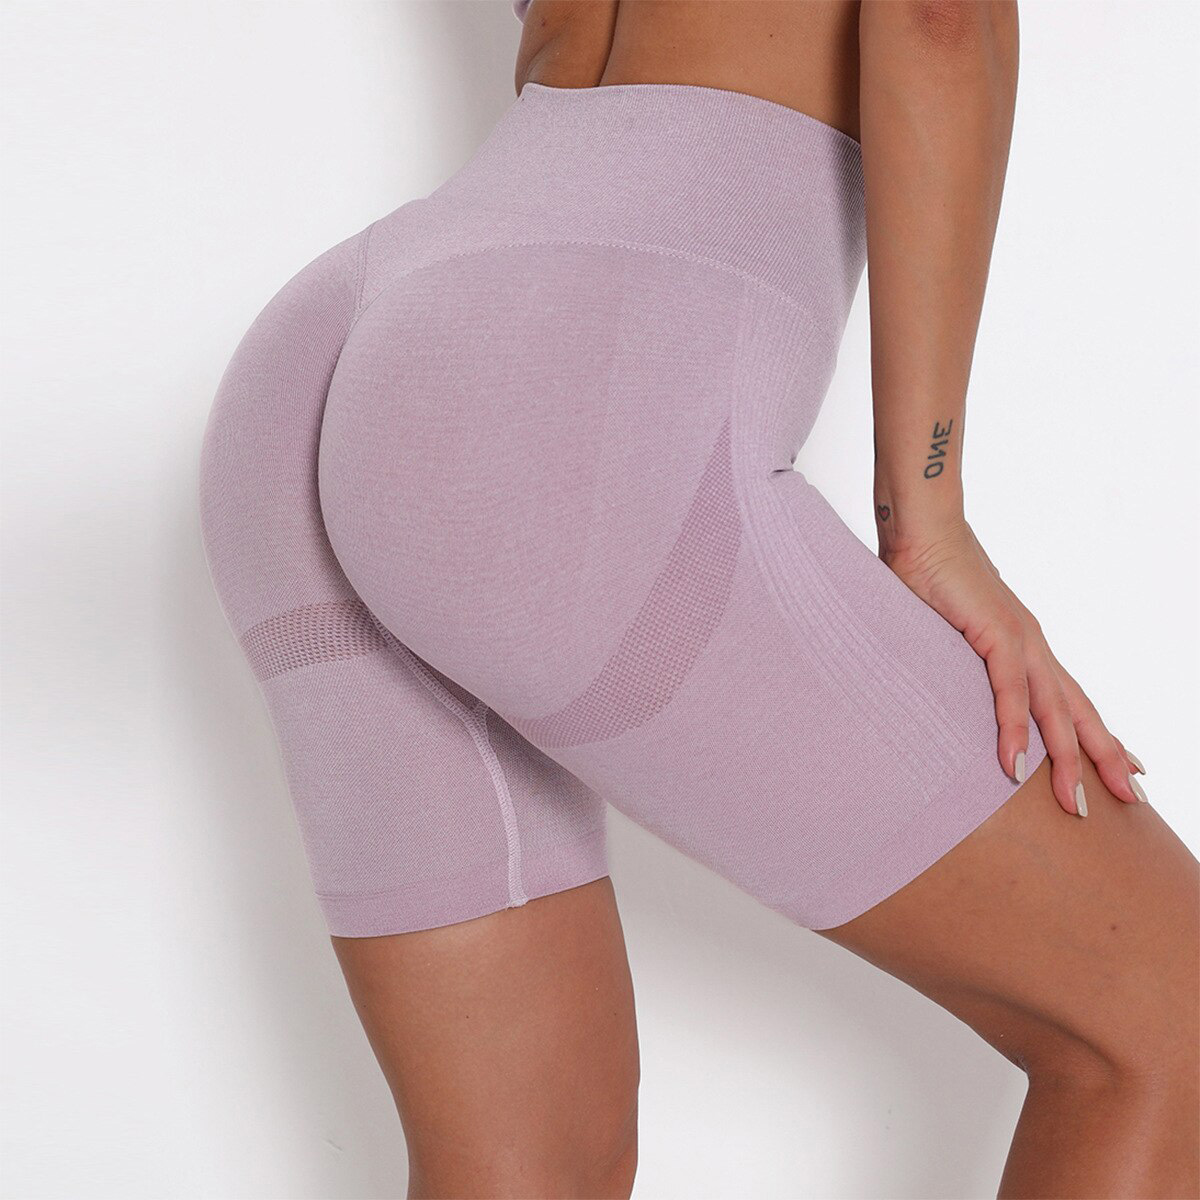 Sports Shorts For Women Cycling Running Fitness High Waist Push Up